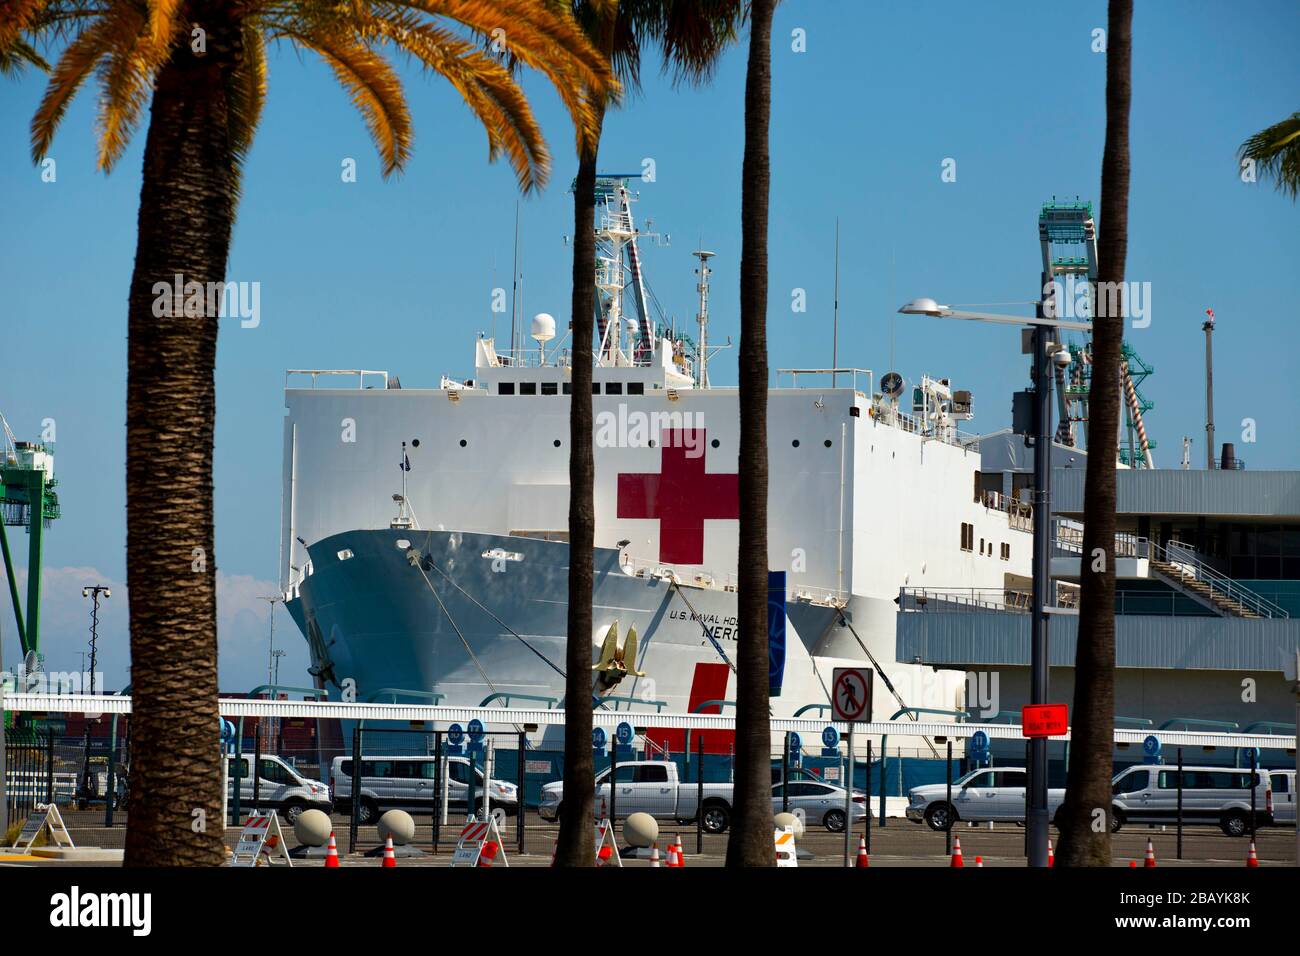 San Pedro, California, USA. 29th Mar, 2020. The Military Sealift Command hospital ship USNS Mercy (T-AH 19) is docked in Los Angeles Port helping to fight the coronavirus (COVID-19). The Mercy has roughly 800 medical staffers, 1,000 hospital beds and 12 operating rooms. Credit: Katrina Kochneva/ZUMA Wire/Alamy Live News Stock Photo